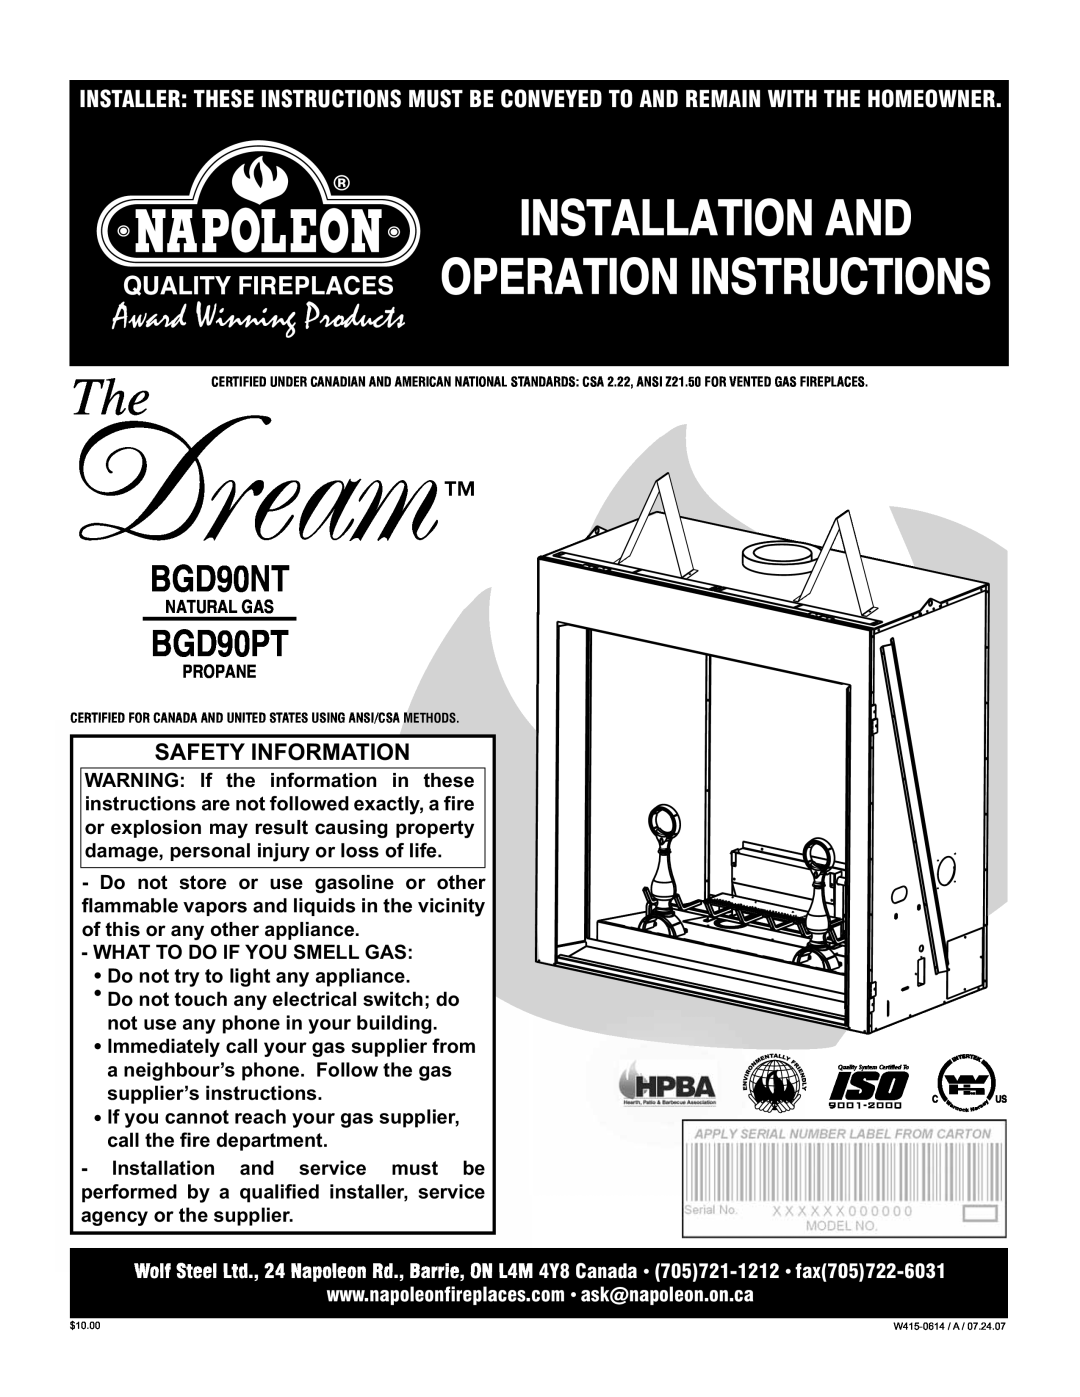 Napoleon Fireplaces BGD90NT manual Installation And Operation Instructions, BGD90PT, Safety Information, Natural Gas 